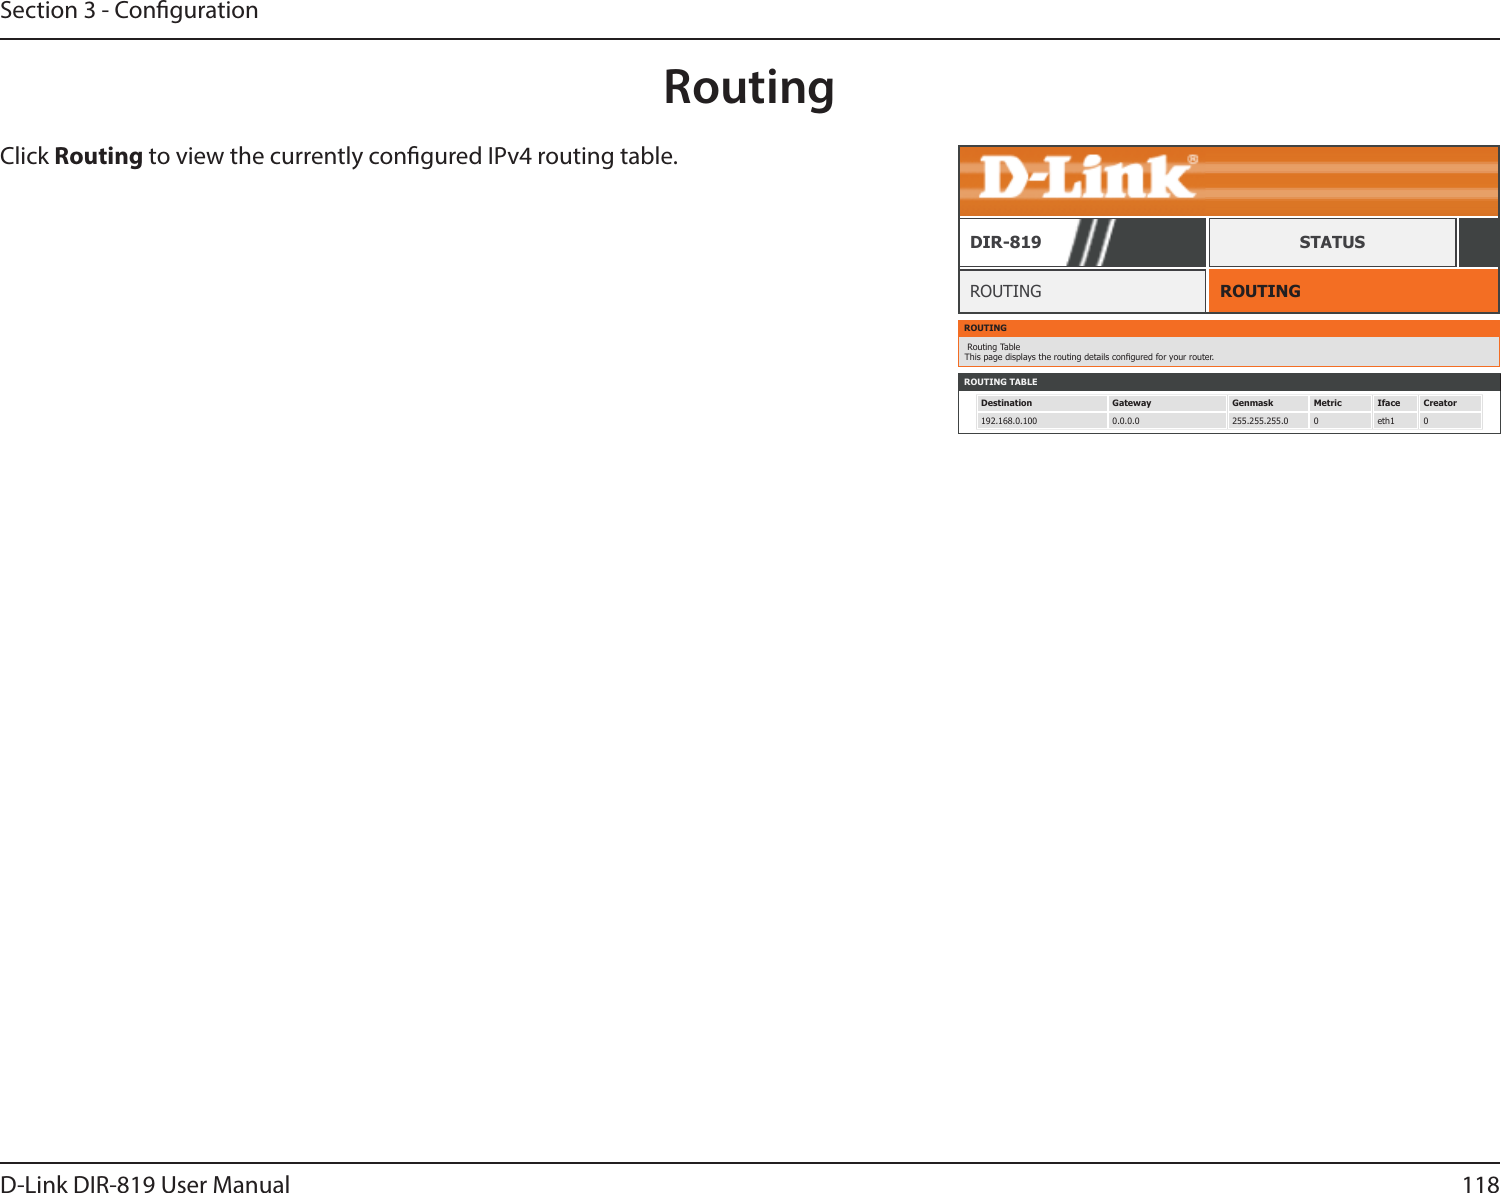 118D-Link DIR-819 User ManualSection 3 - CongurationRoutingROUTINGROUTINGDIR-819 STATUSClick Routing to view the currently congured IPv4 routing table.ROUTING Routing Table This page displays the routing details congured for your router.ROUTING TABLEDestination Gateway Genmask Metric Iface Creator192.168.0.100 0.0.0.0 255.255.255.0 0 eth1 0